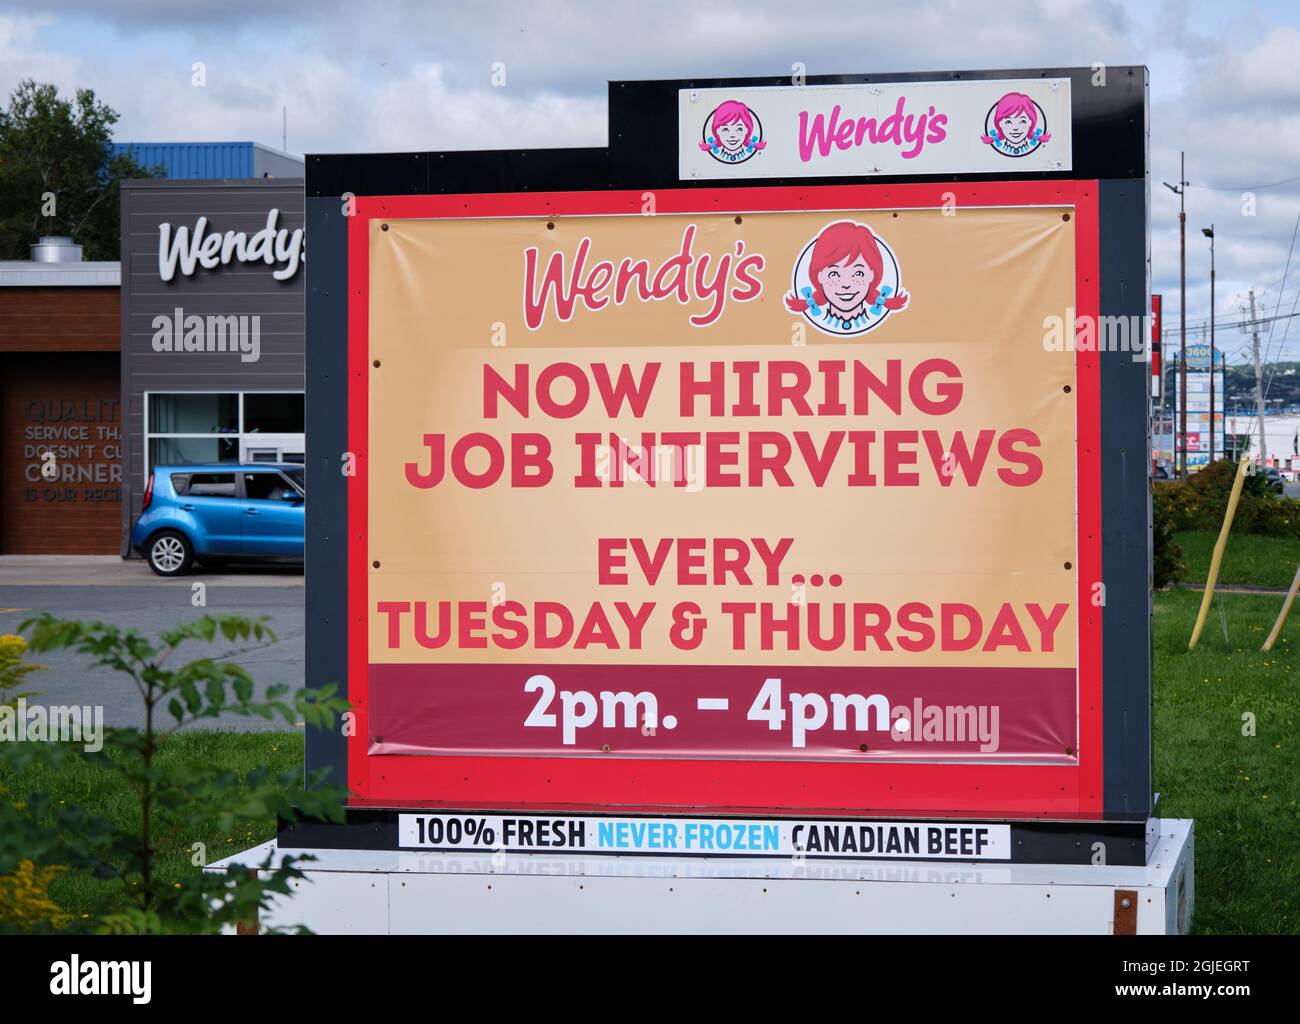 Sign at Wendy's fast food restaurant 'Now Hiring' interviews twice a week Stock Photo